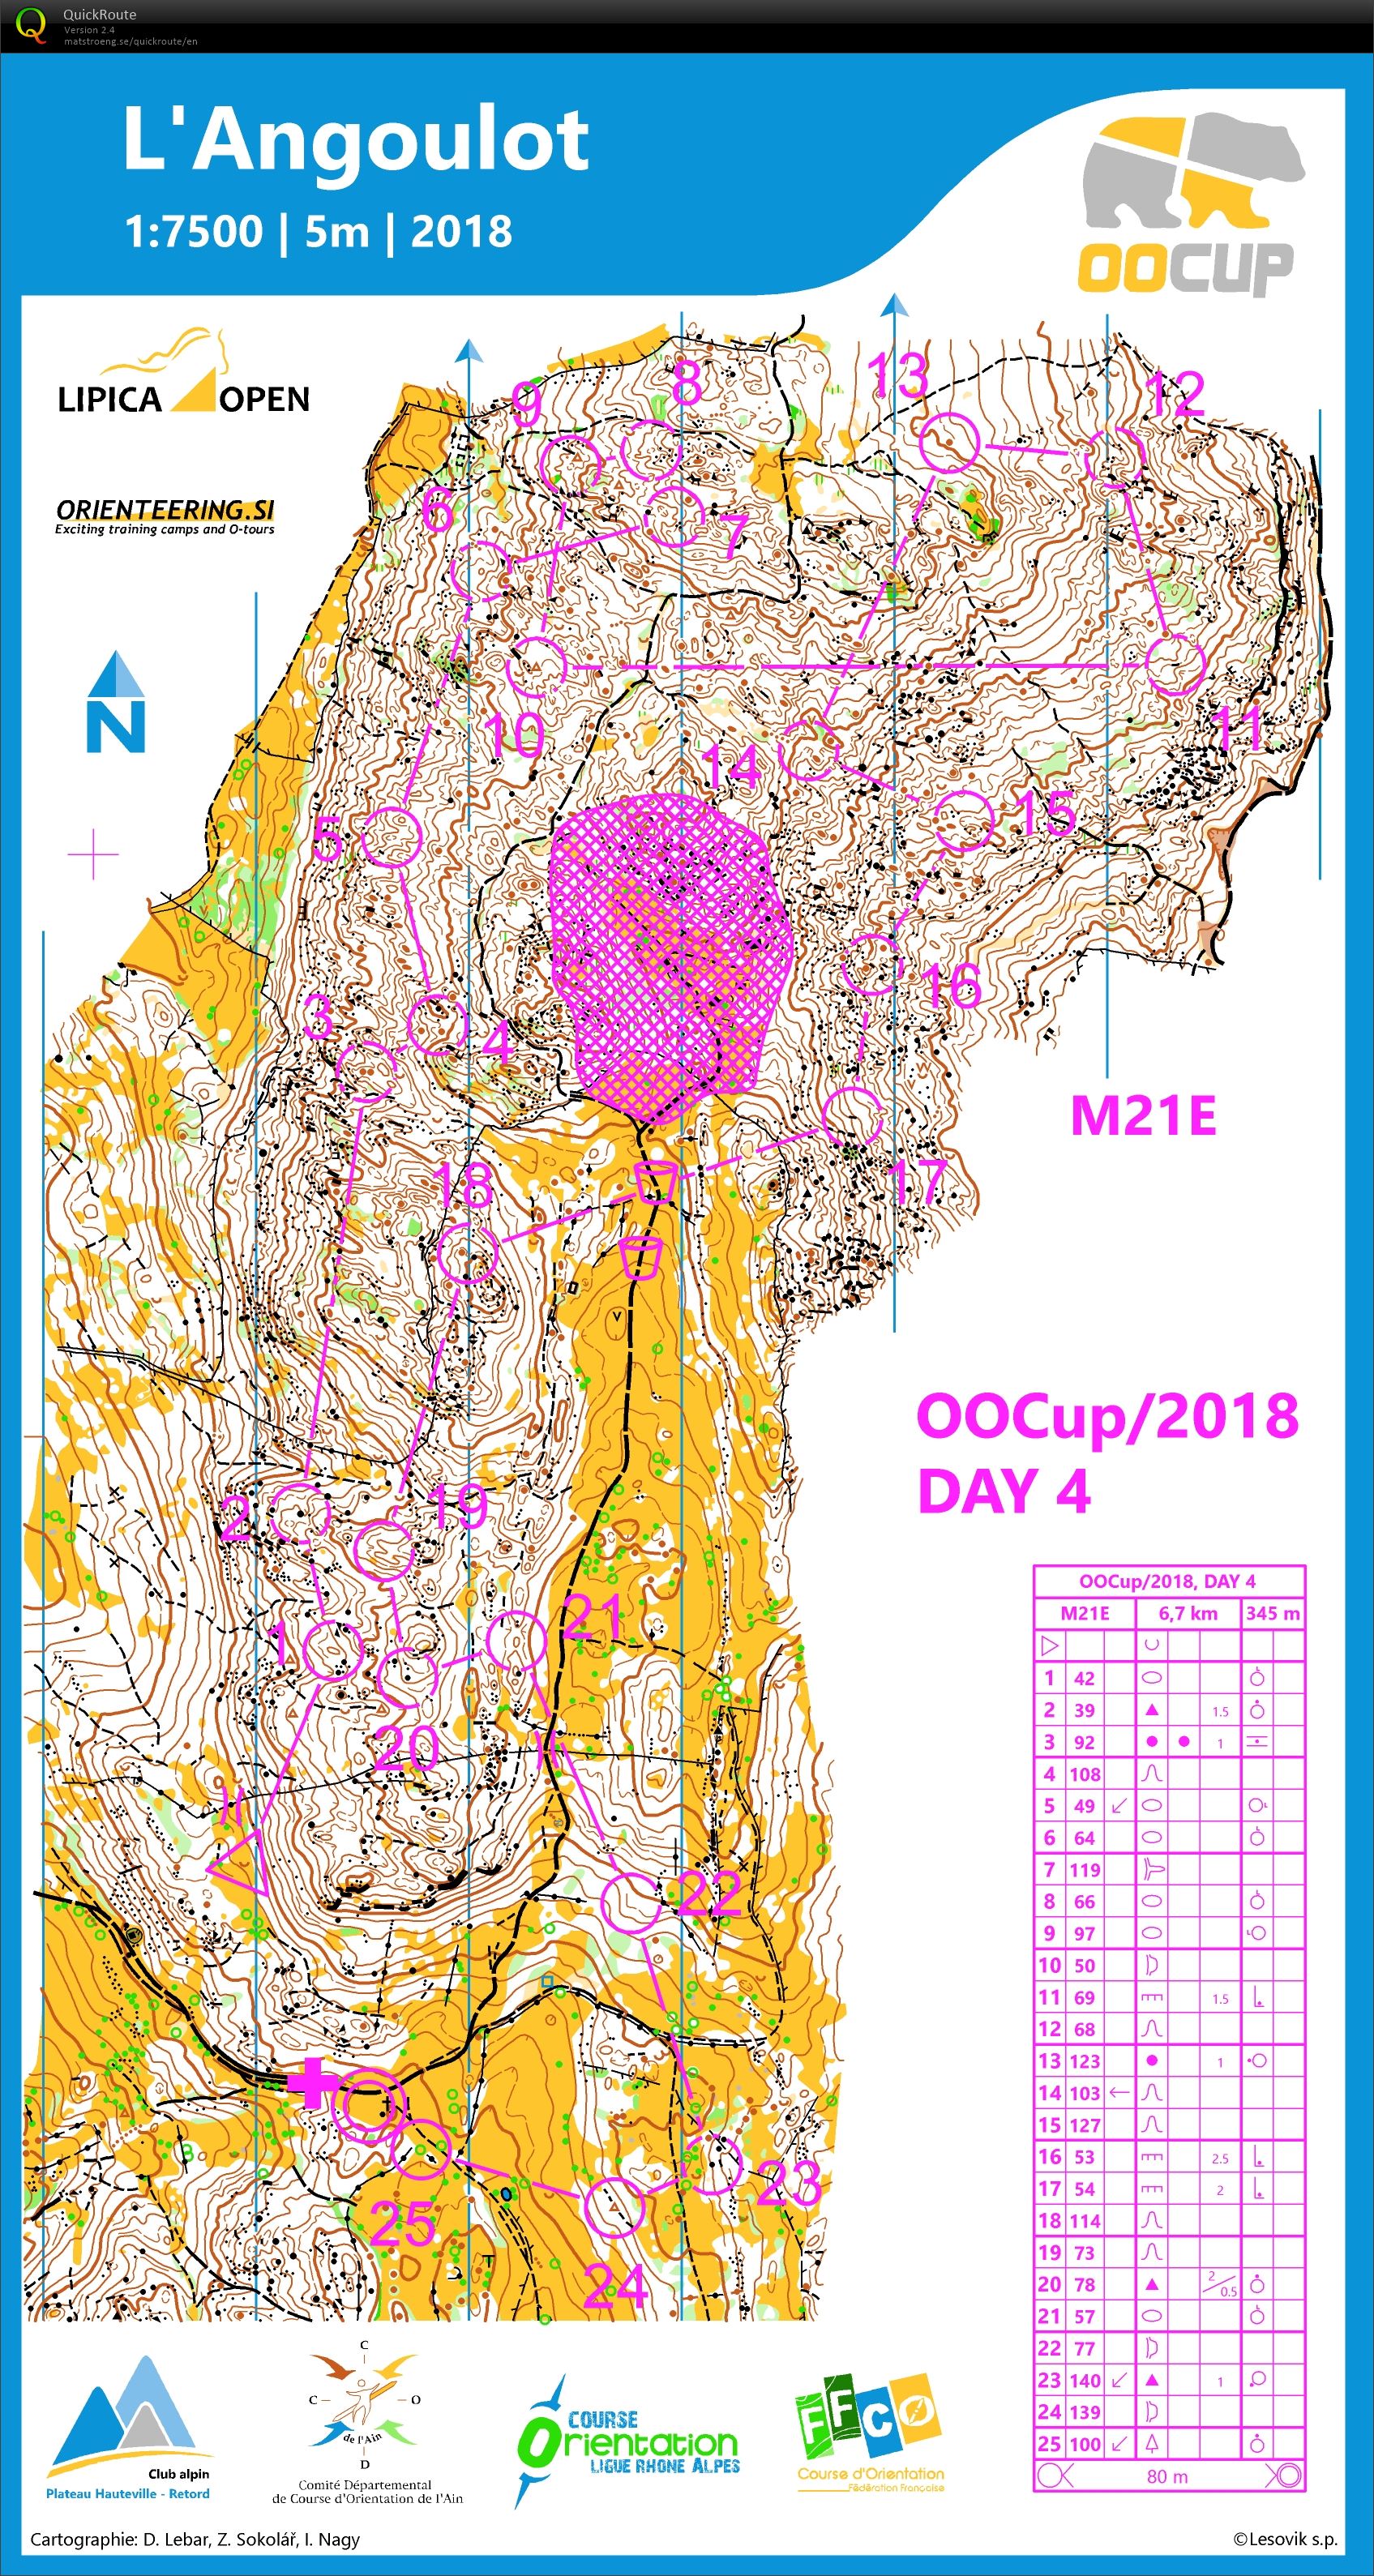 OOCup Stage 4 (28-07-2018)